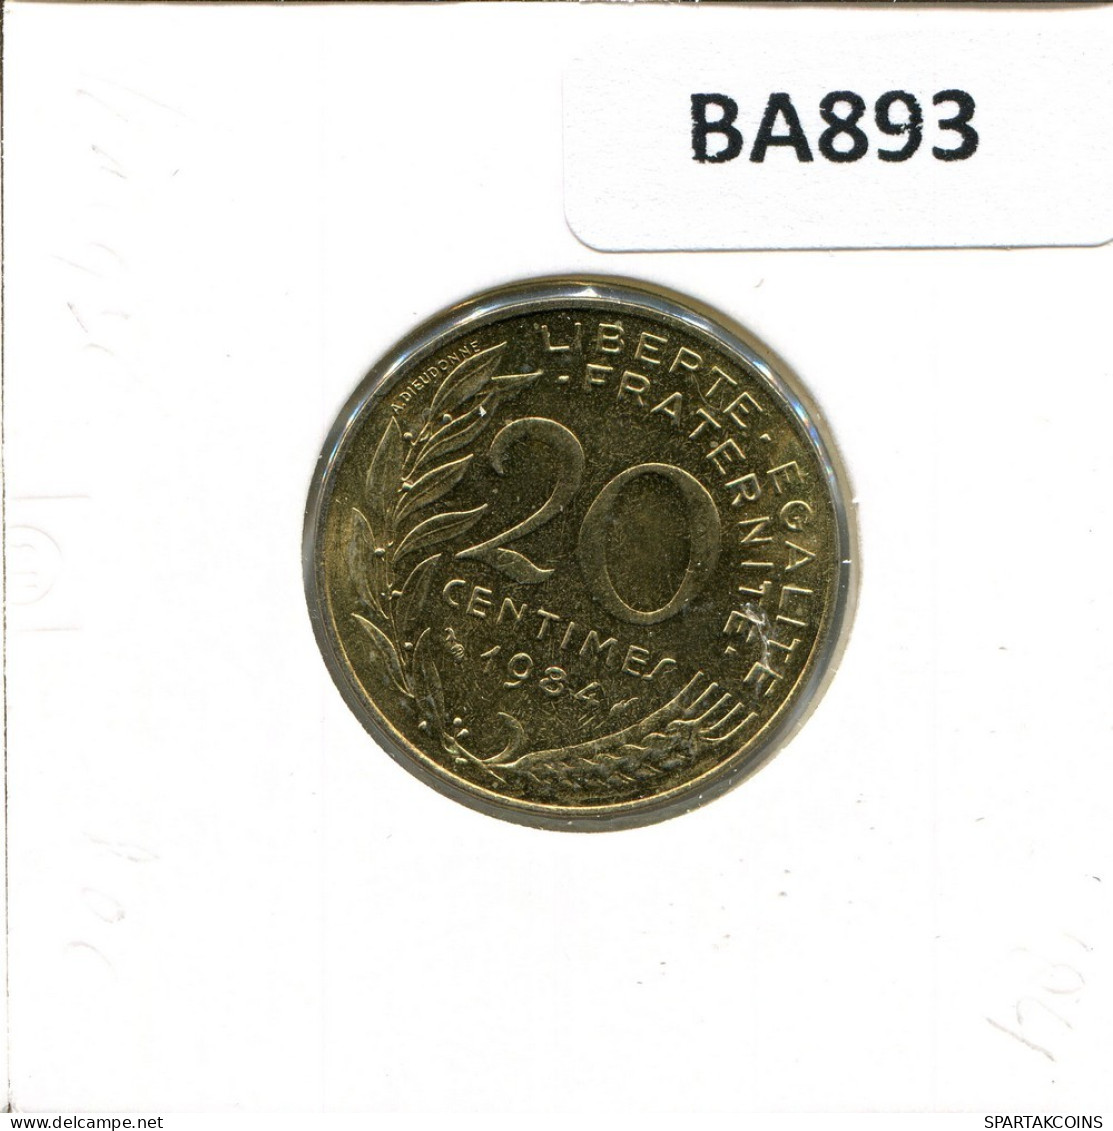 20 CENTIMES 1984 FRANCE Coin French Coin #BA893.U.A - 20 Centimes